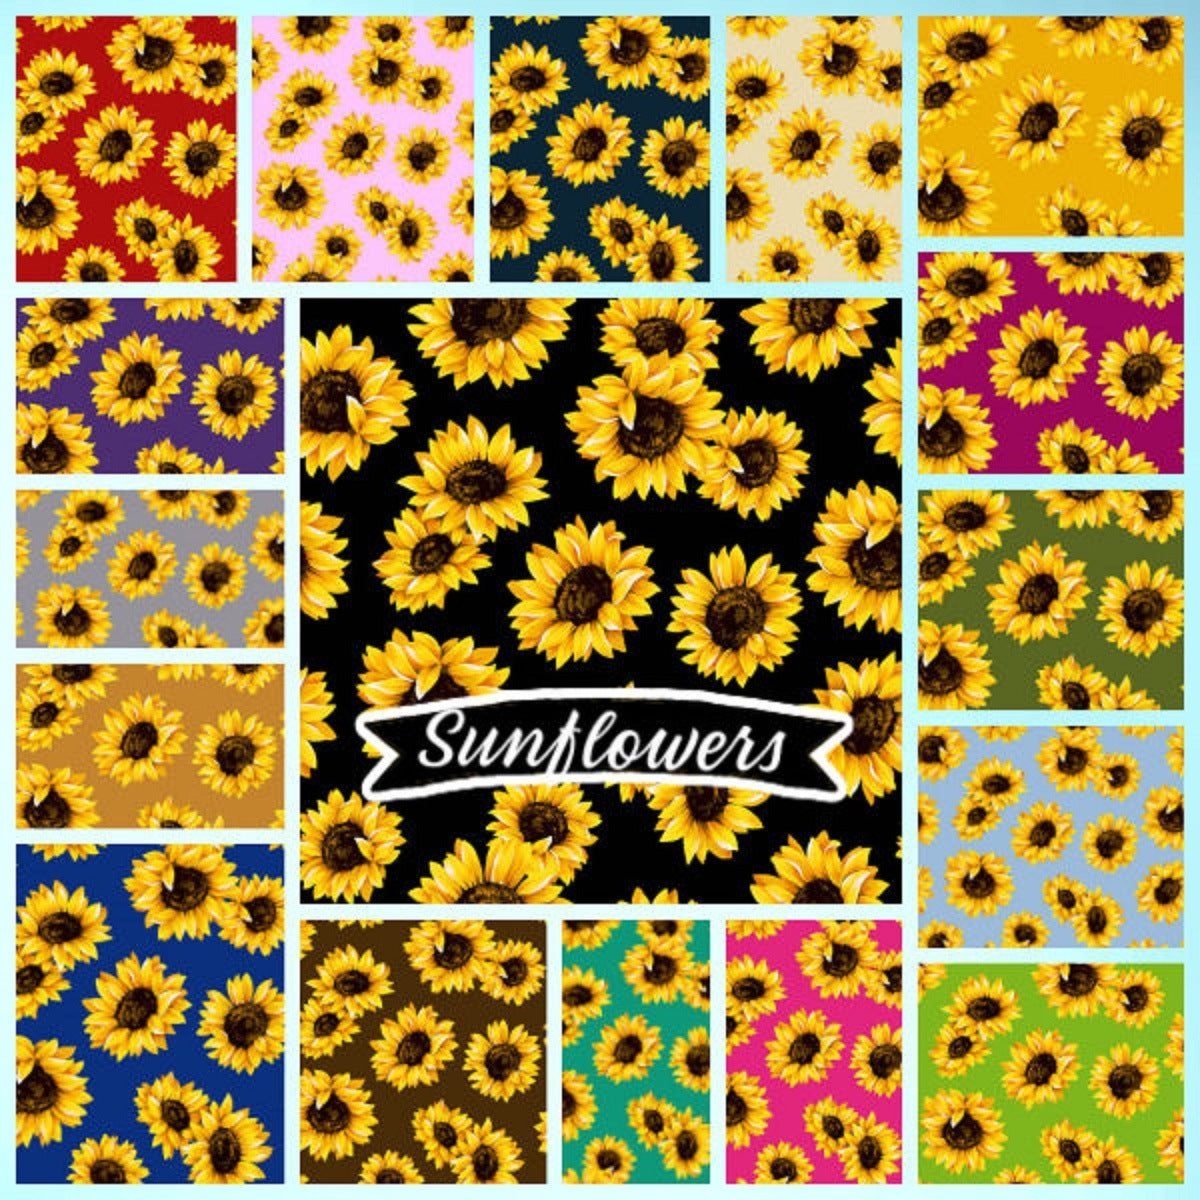 2.5 inch SUNFLOWERS Strip Roll 100% cotton fabric quilting strips 17 pieces pre cut strips